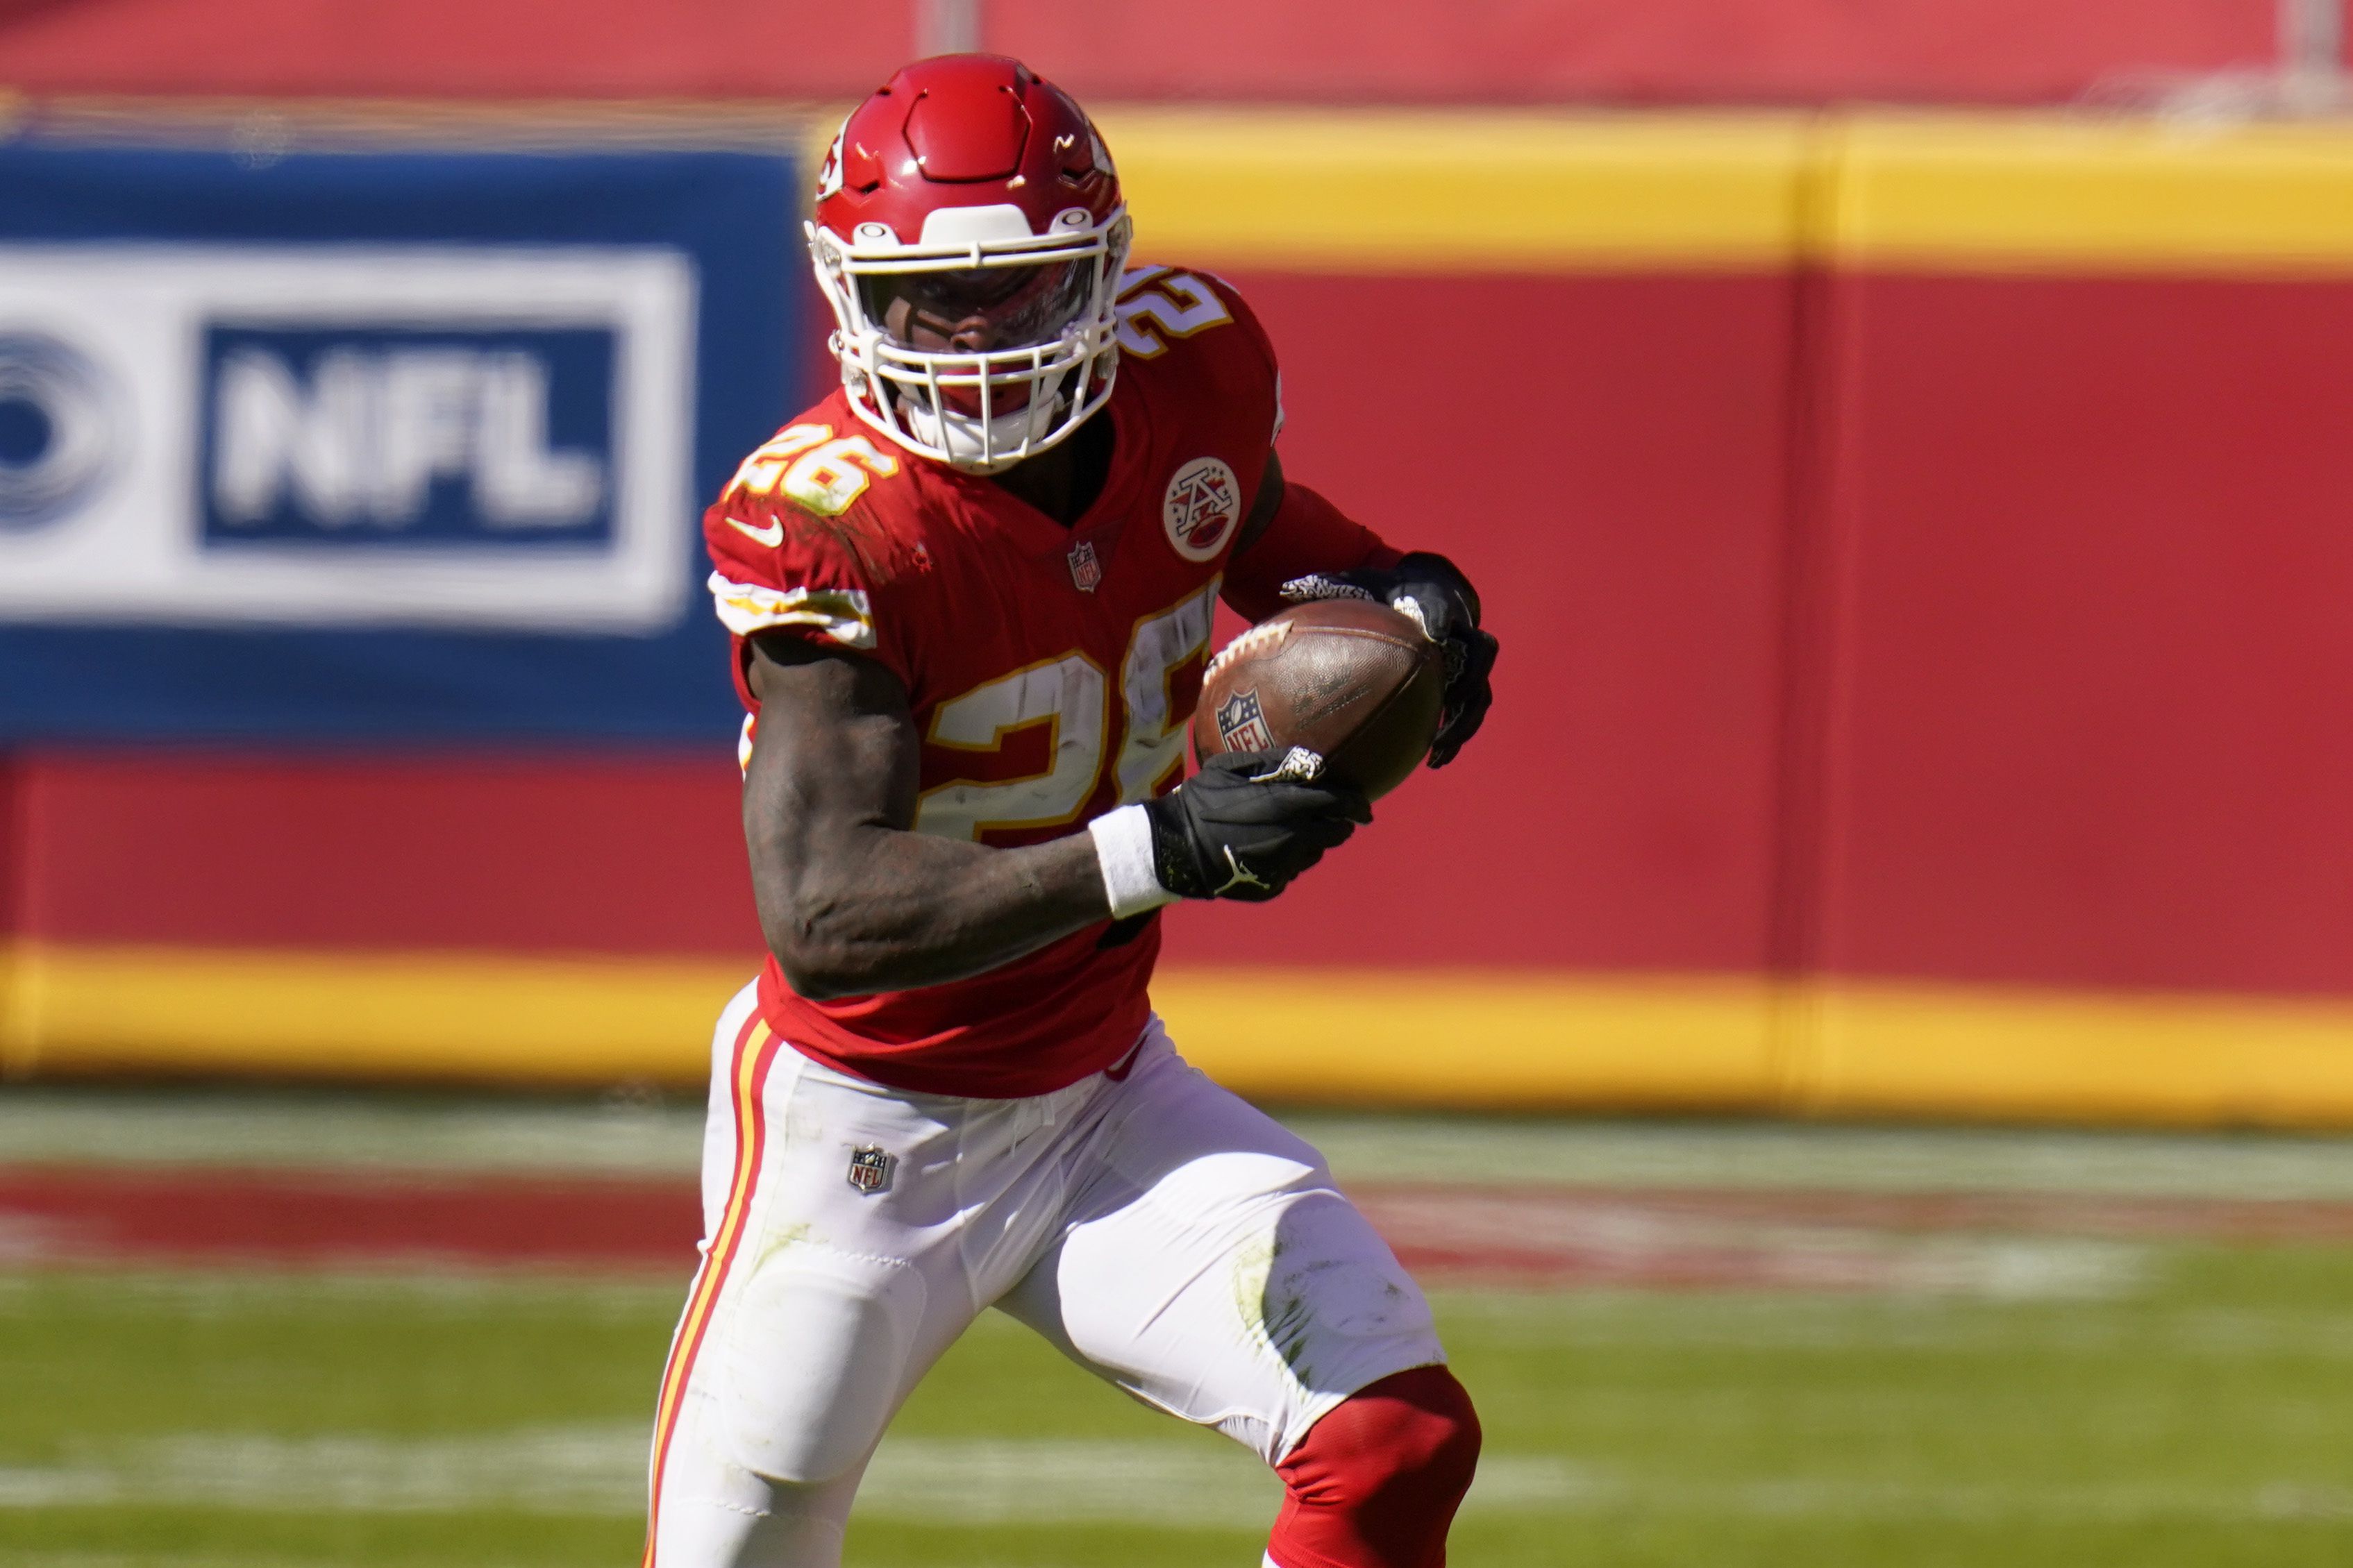 Spartans in the NFL: Le'Veon Bell gets first touchdown with Chiefs 